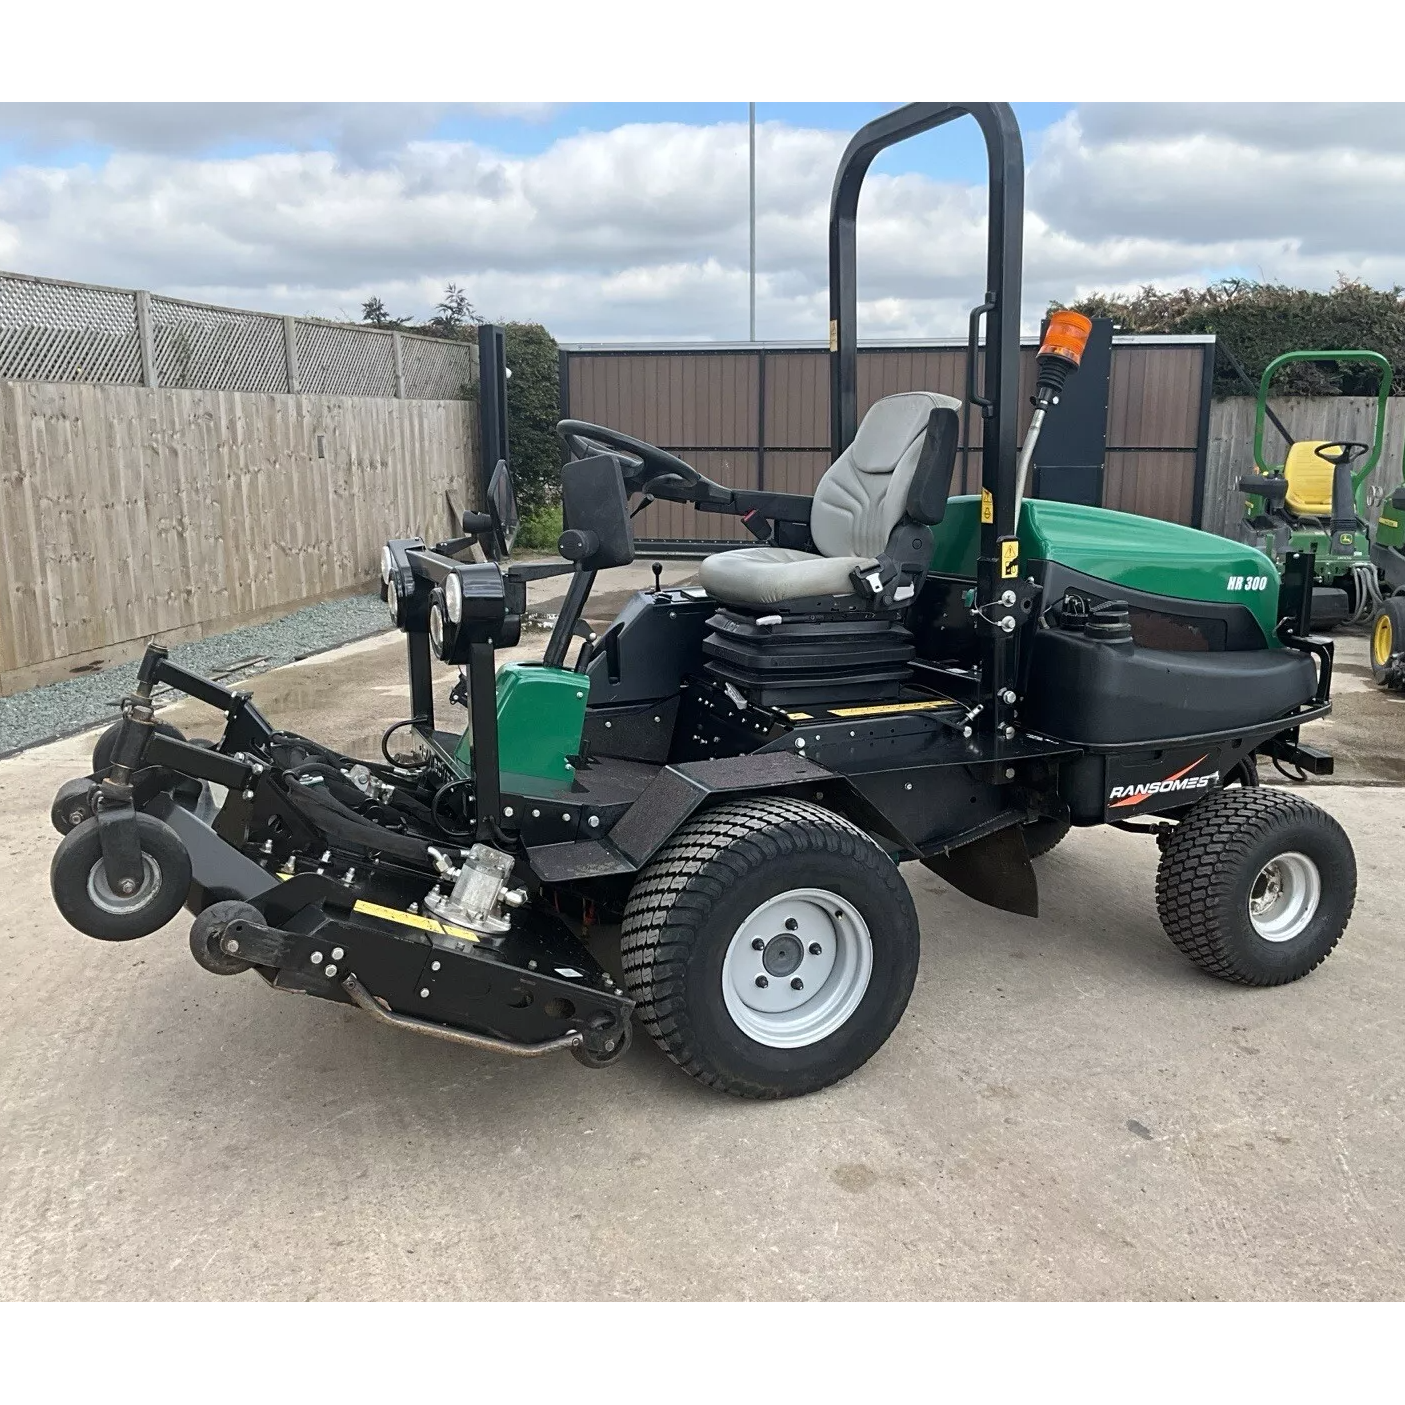 2019 RANSOMES HR300 OUTFRONT ROTARY DIESEL RIDE ON LAWN MOWER